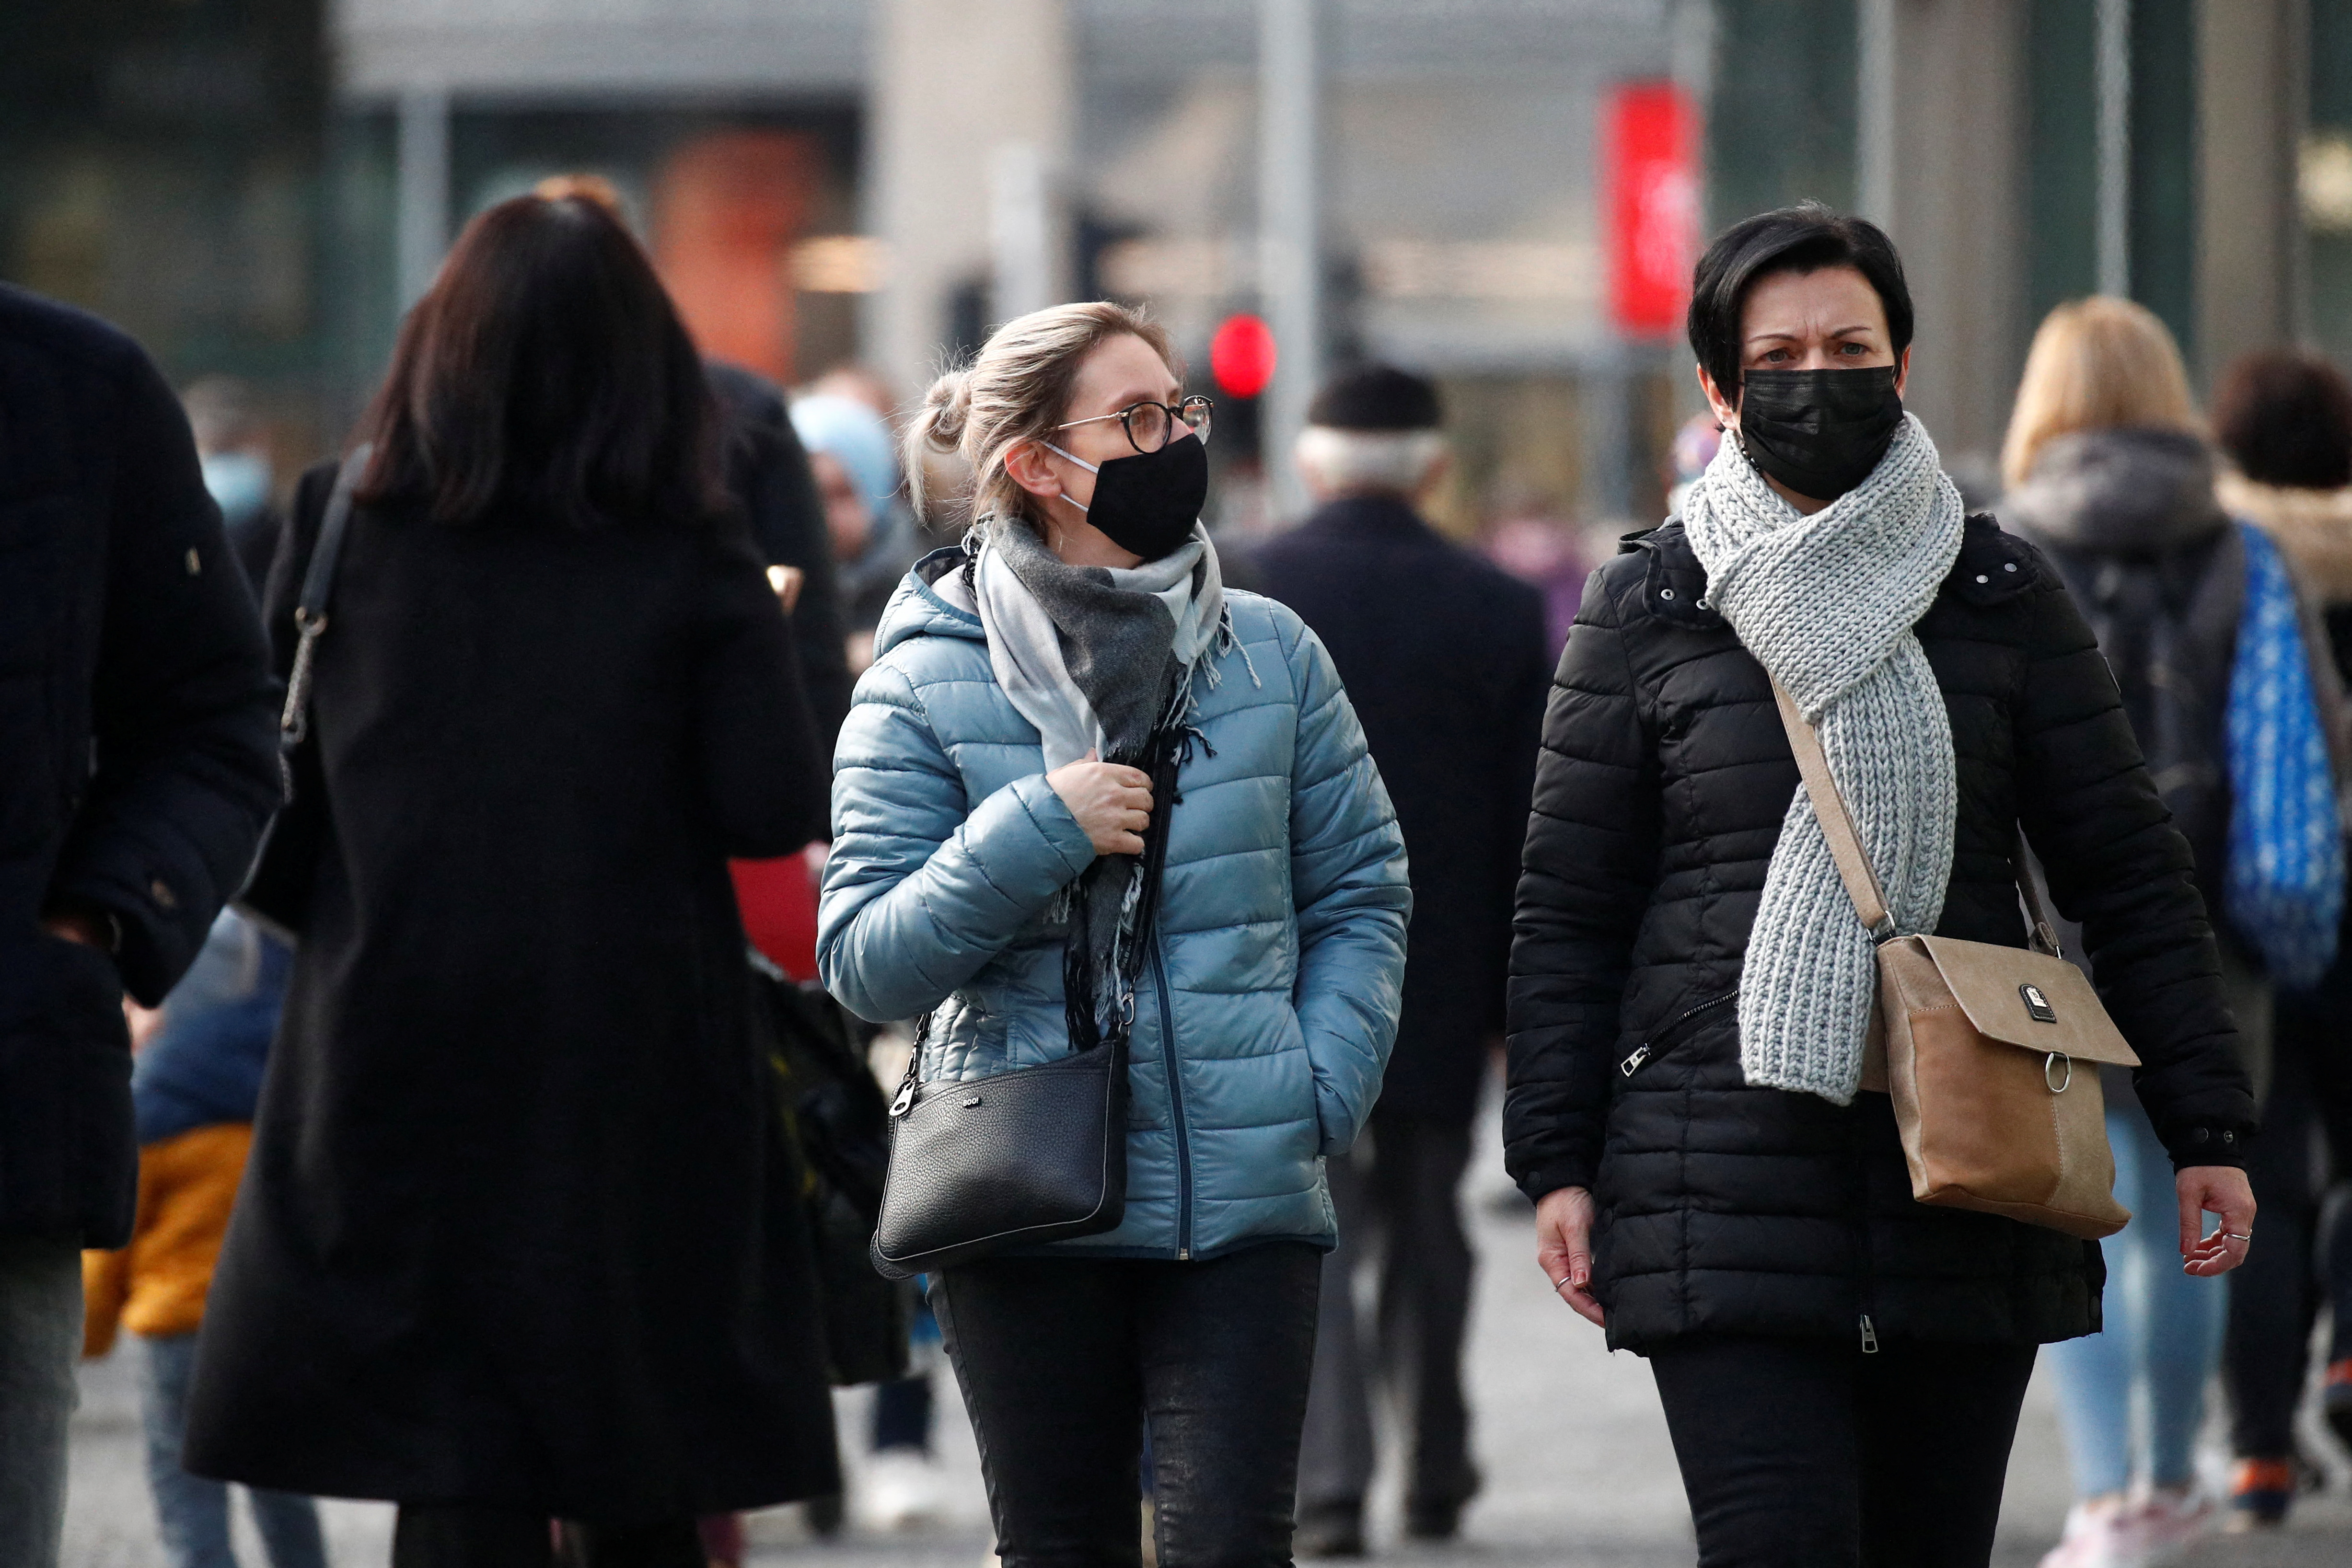 People wearing protective face masks walk on a street in Brussels